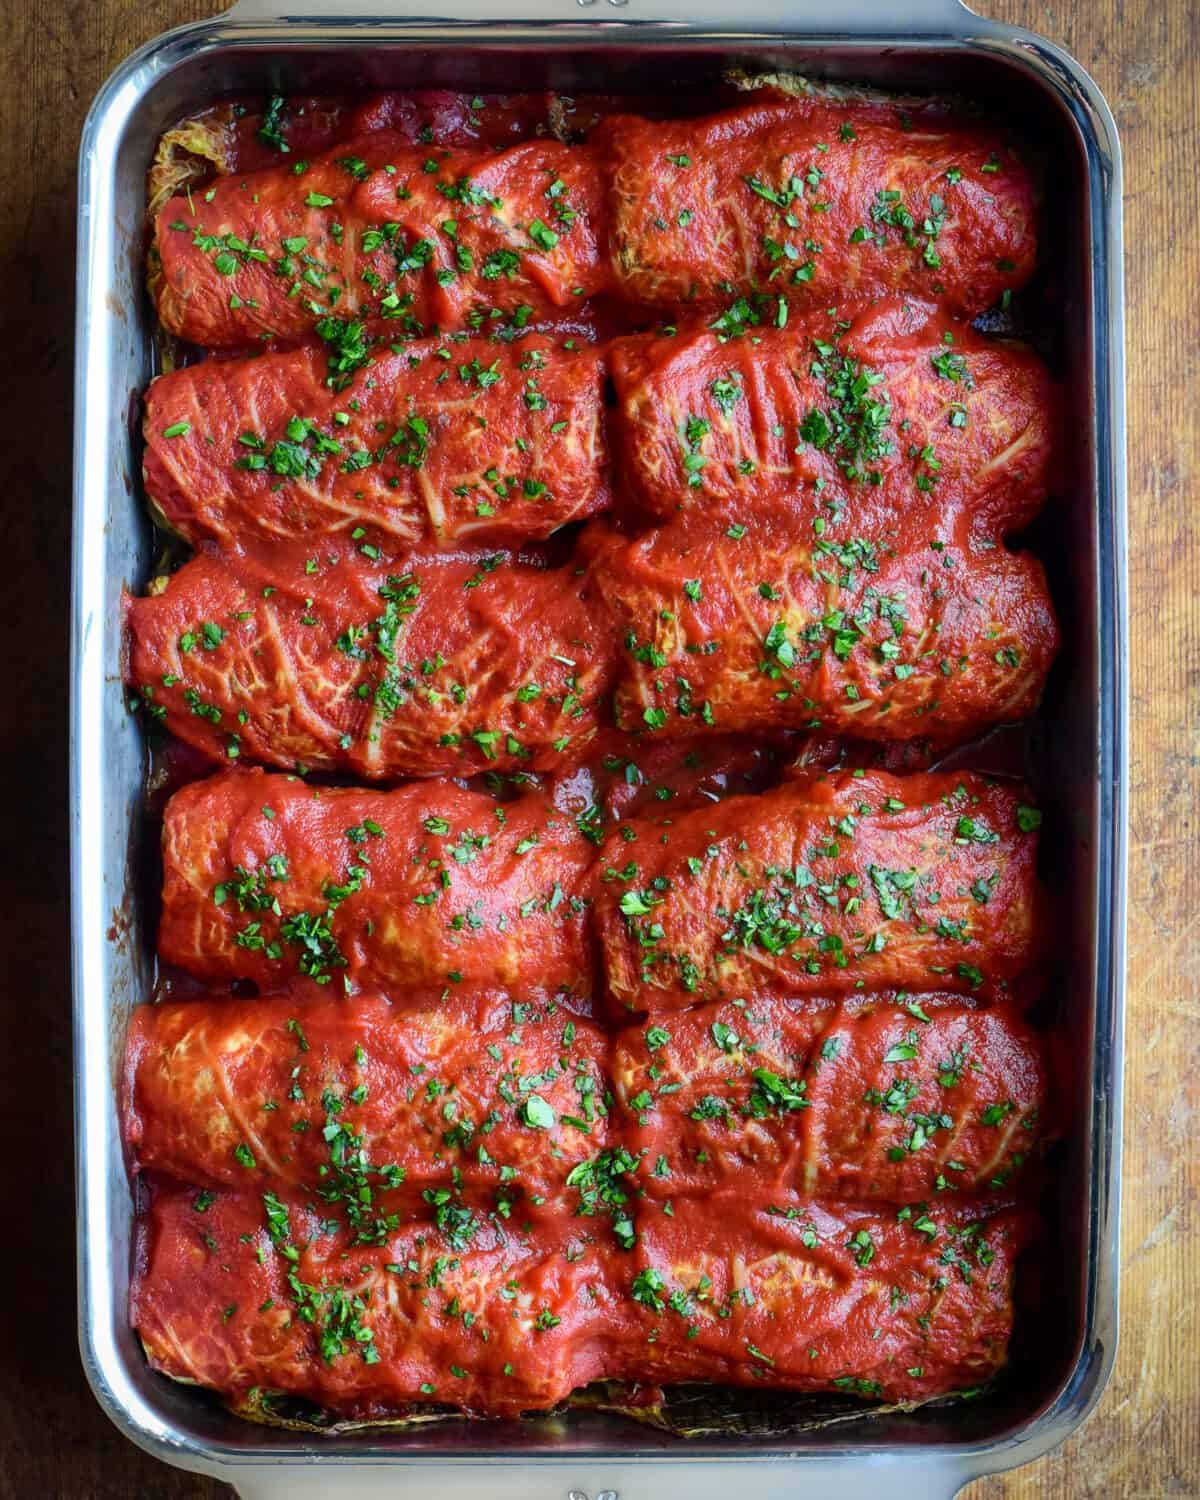 Two rows of cabbage rolls with tomato sauce in a baking pan.